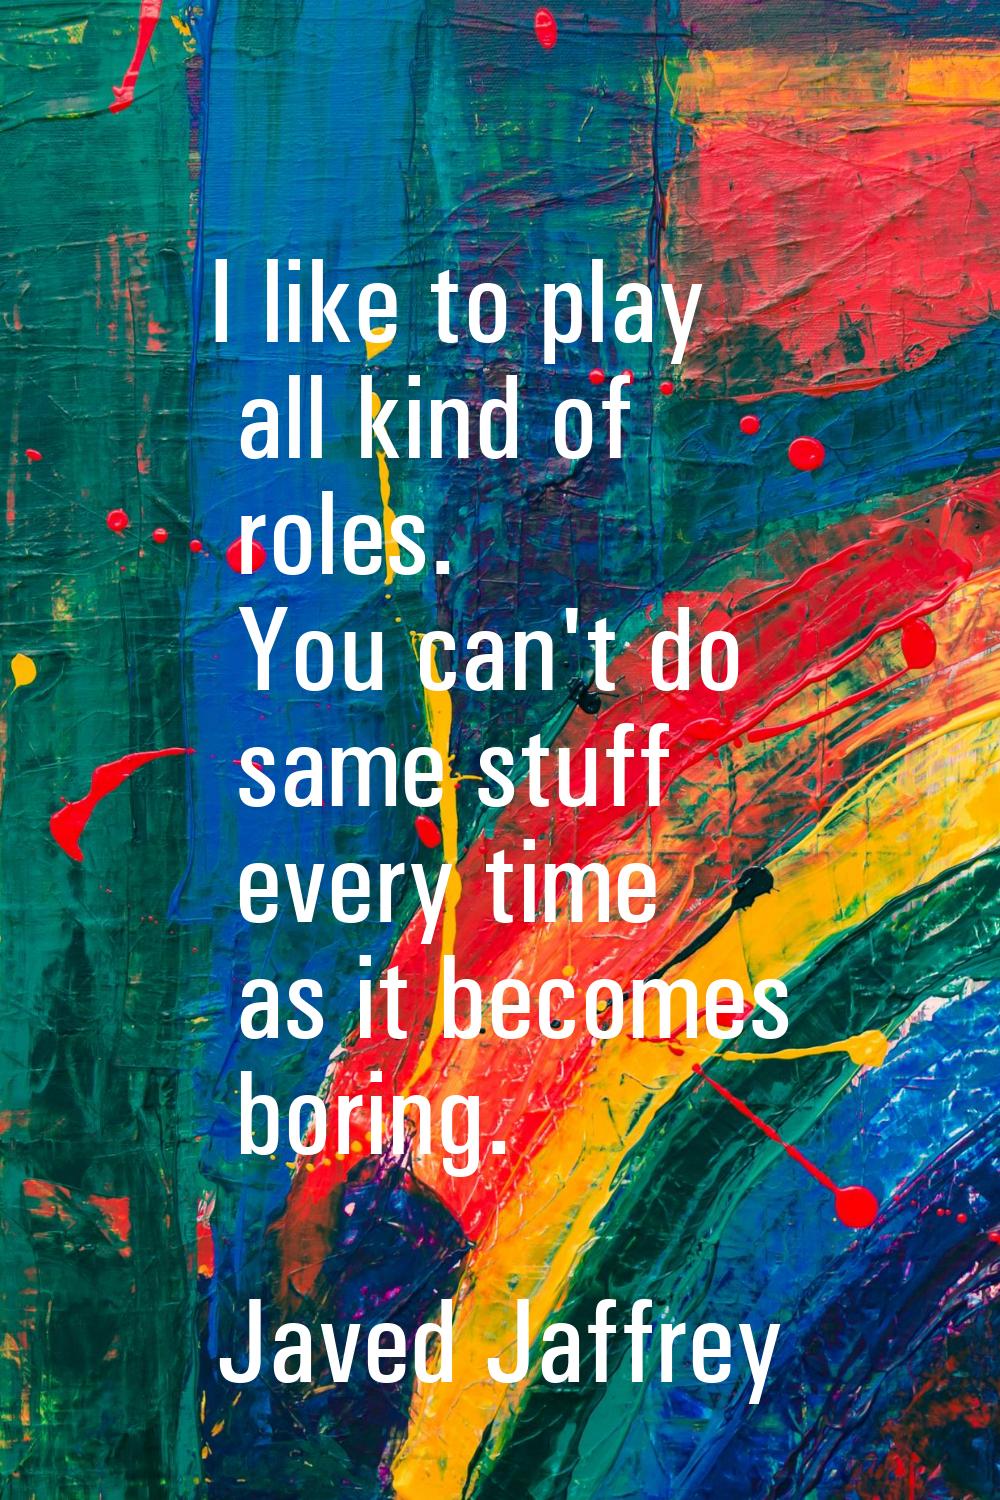 I like to play all kind of roles. You can't do same stuff every time as it becomes boring.